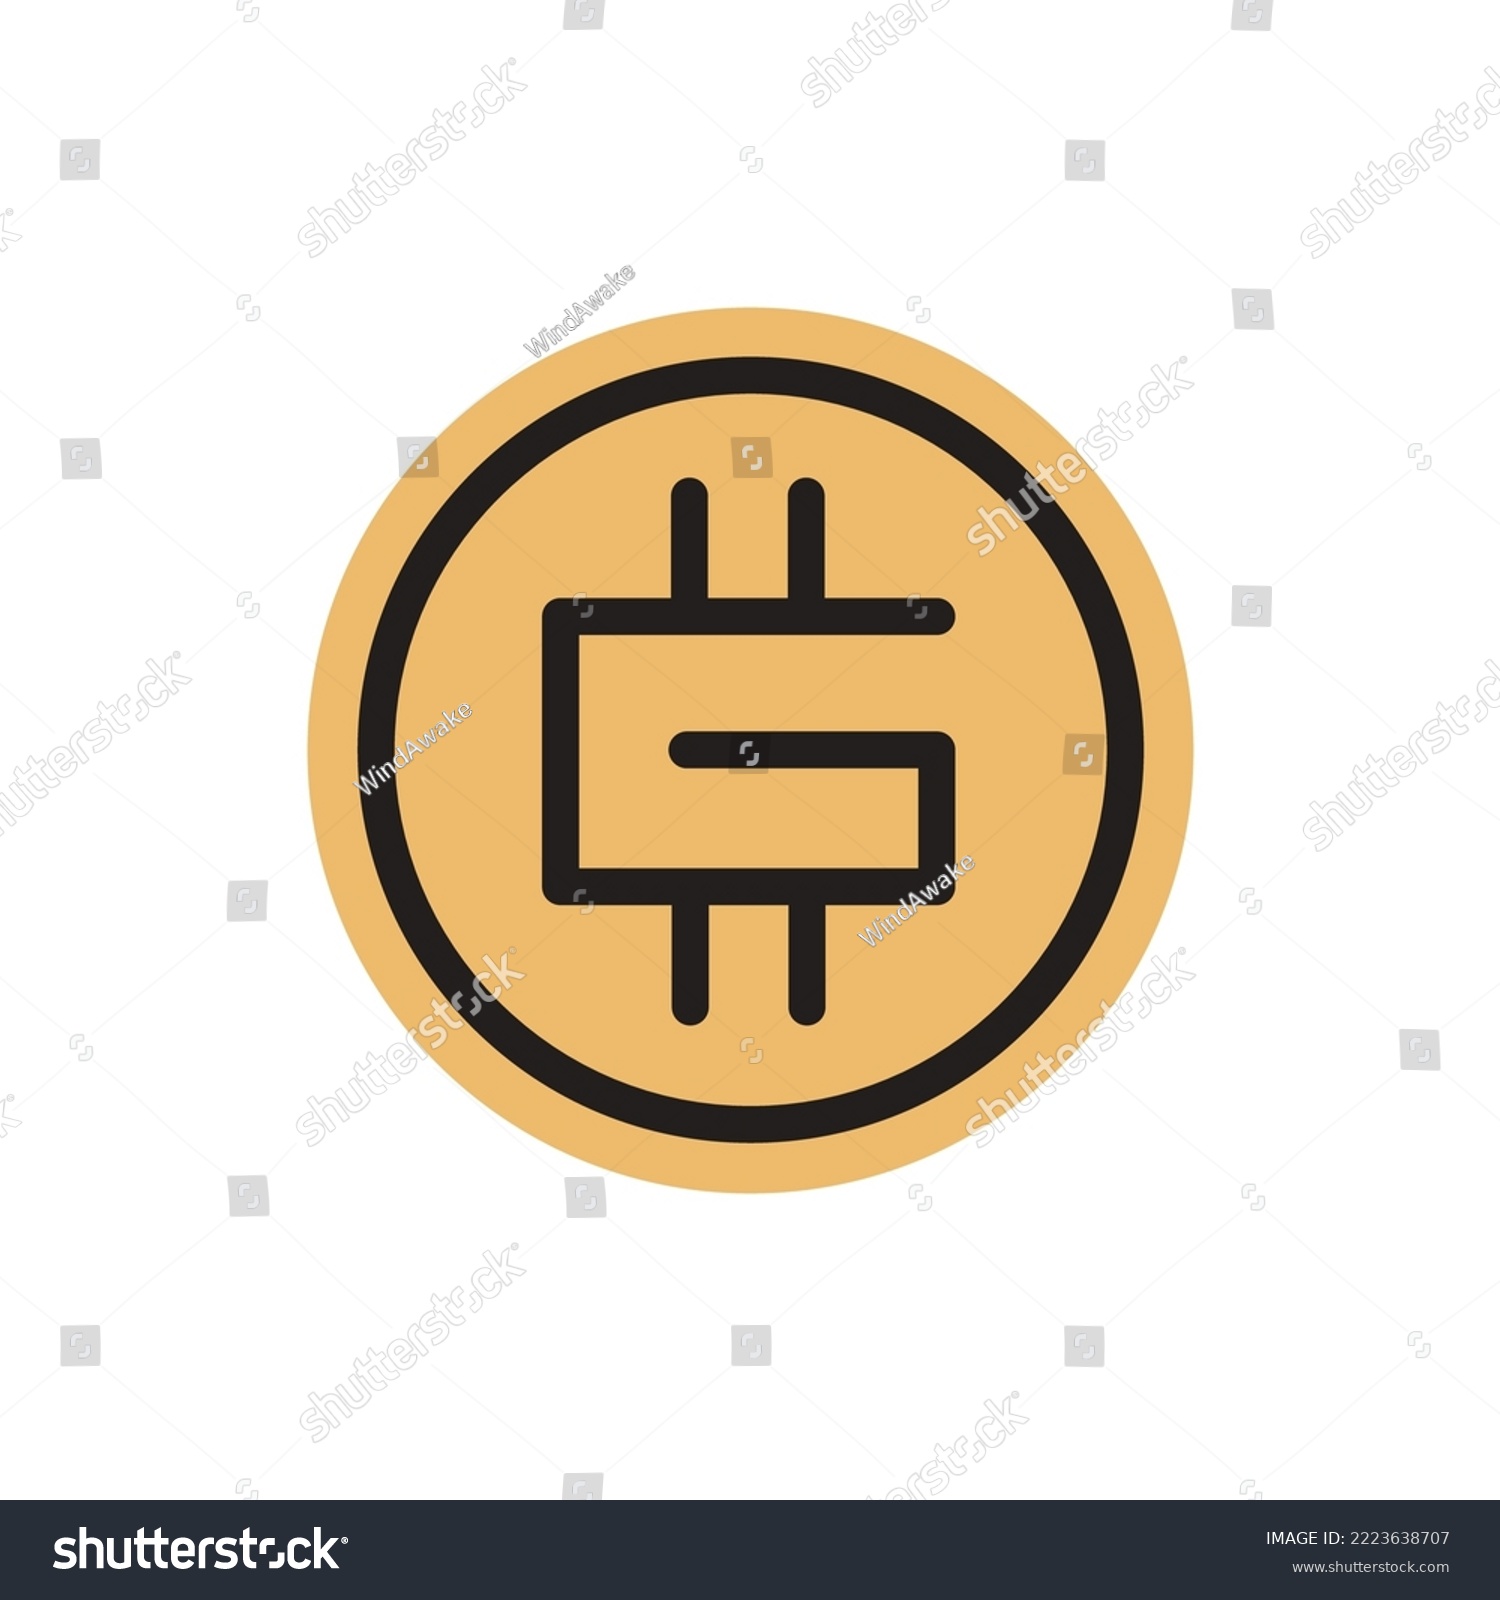 SVG of Green metaverse token (GMT) icon isolated on white background. svg